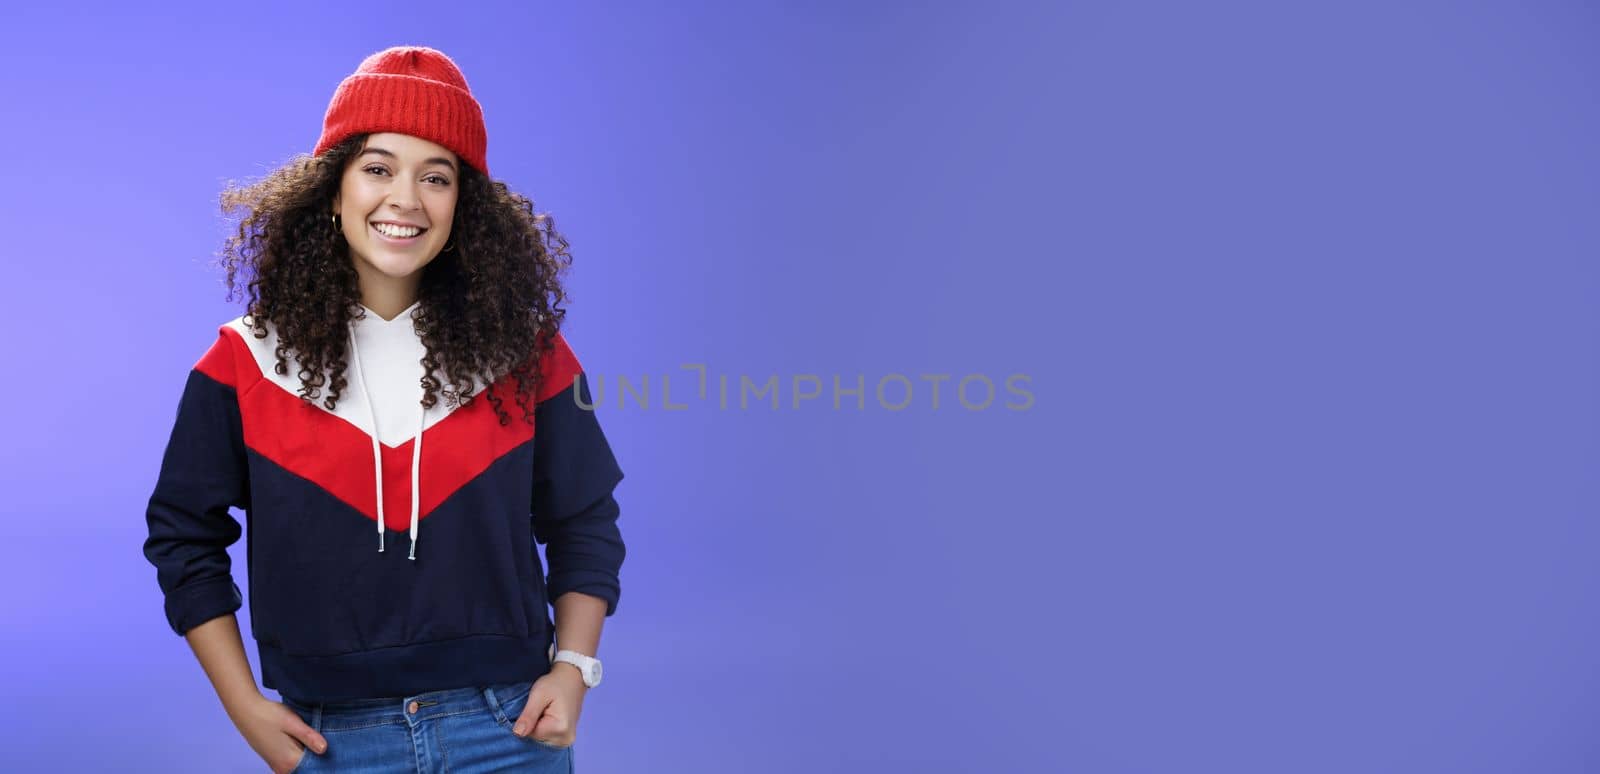 Girl invites join her team to srow snowballs. Portrait of friendly-looking carefree joyful woman with curly hair in red cute beanie and warm sweatshirt smiling joyfully getting ready for winter by Benzoix